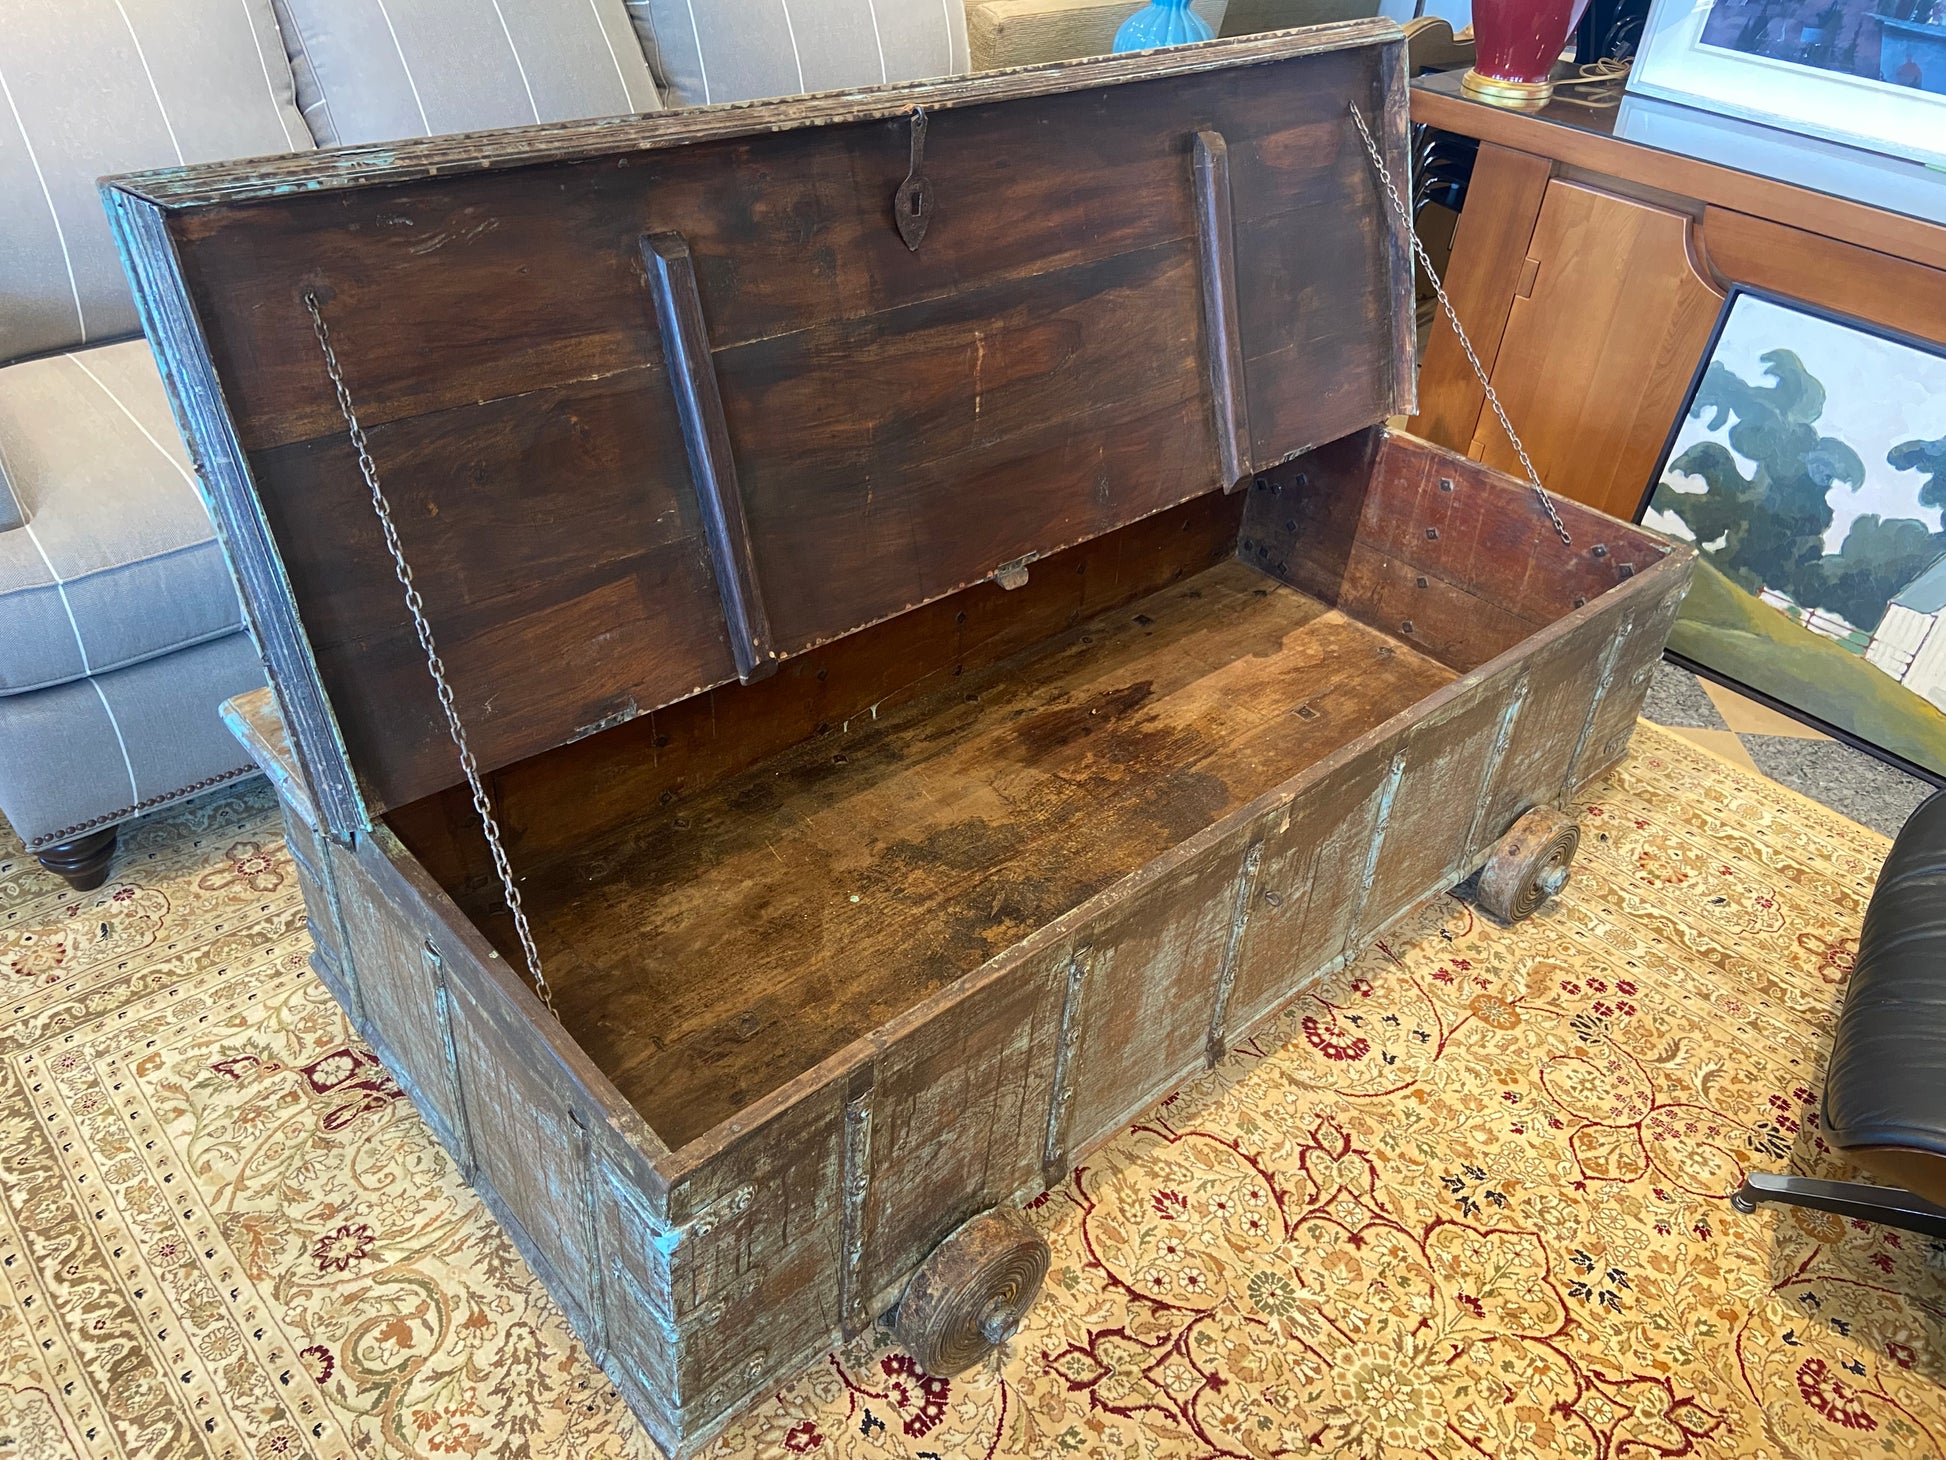 Rustic Trunk Coffee Table - Hope Chest